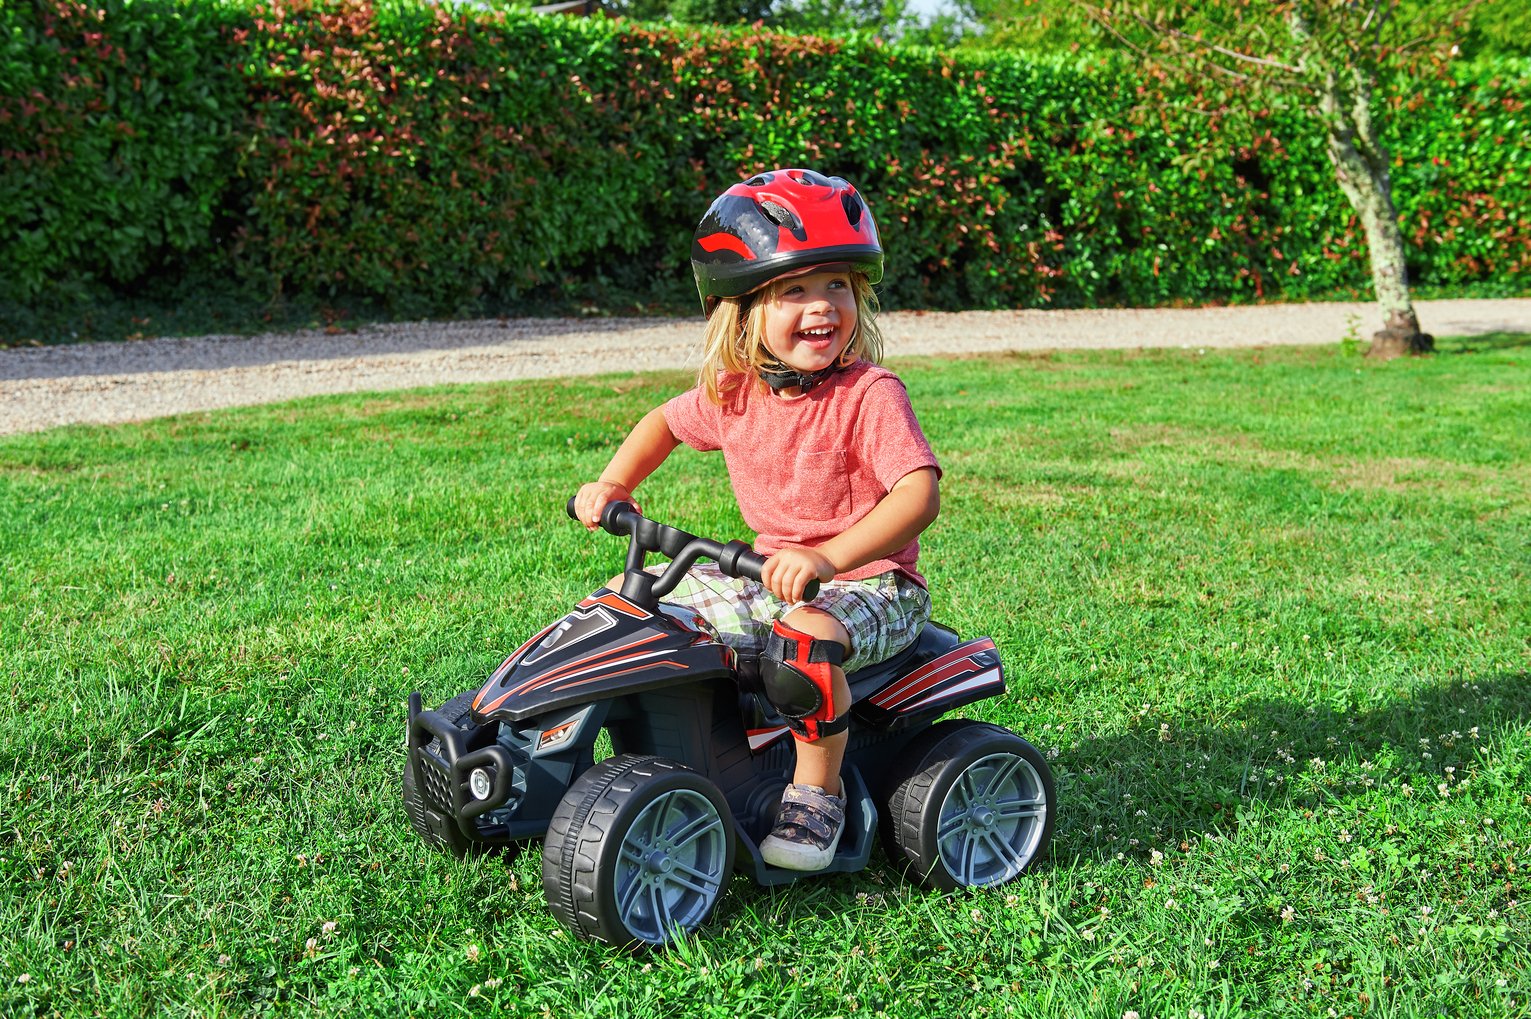 Chad Valley Baby 6V Powered Quad Bike Ride On Review